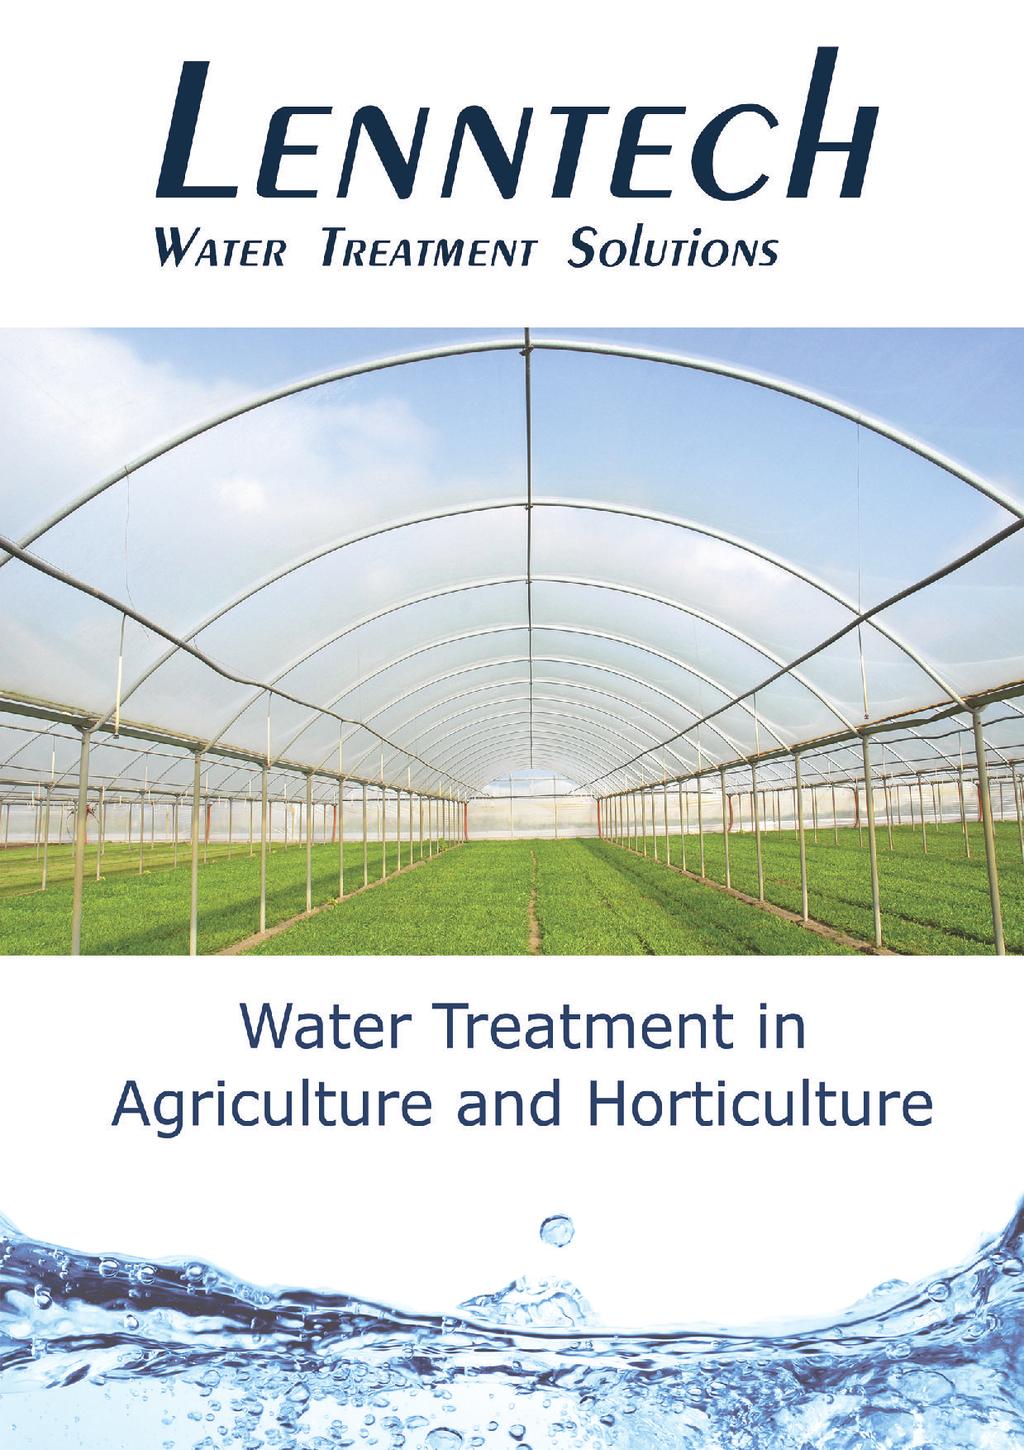 _ENNTEC WATER TREATMENT SOlUTioNS Water